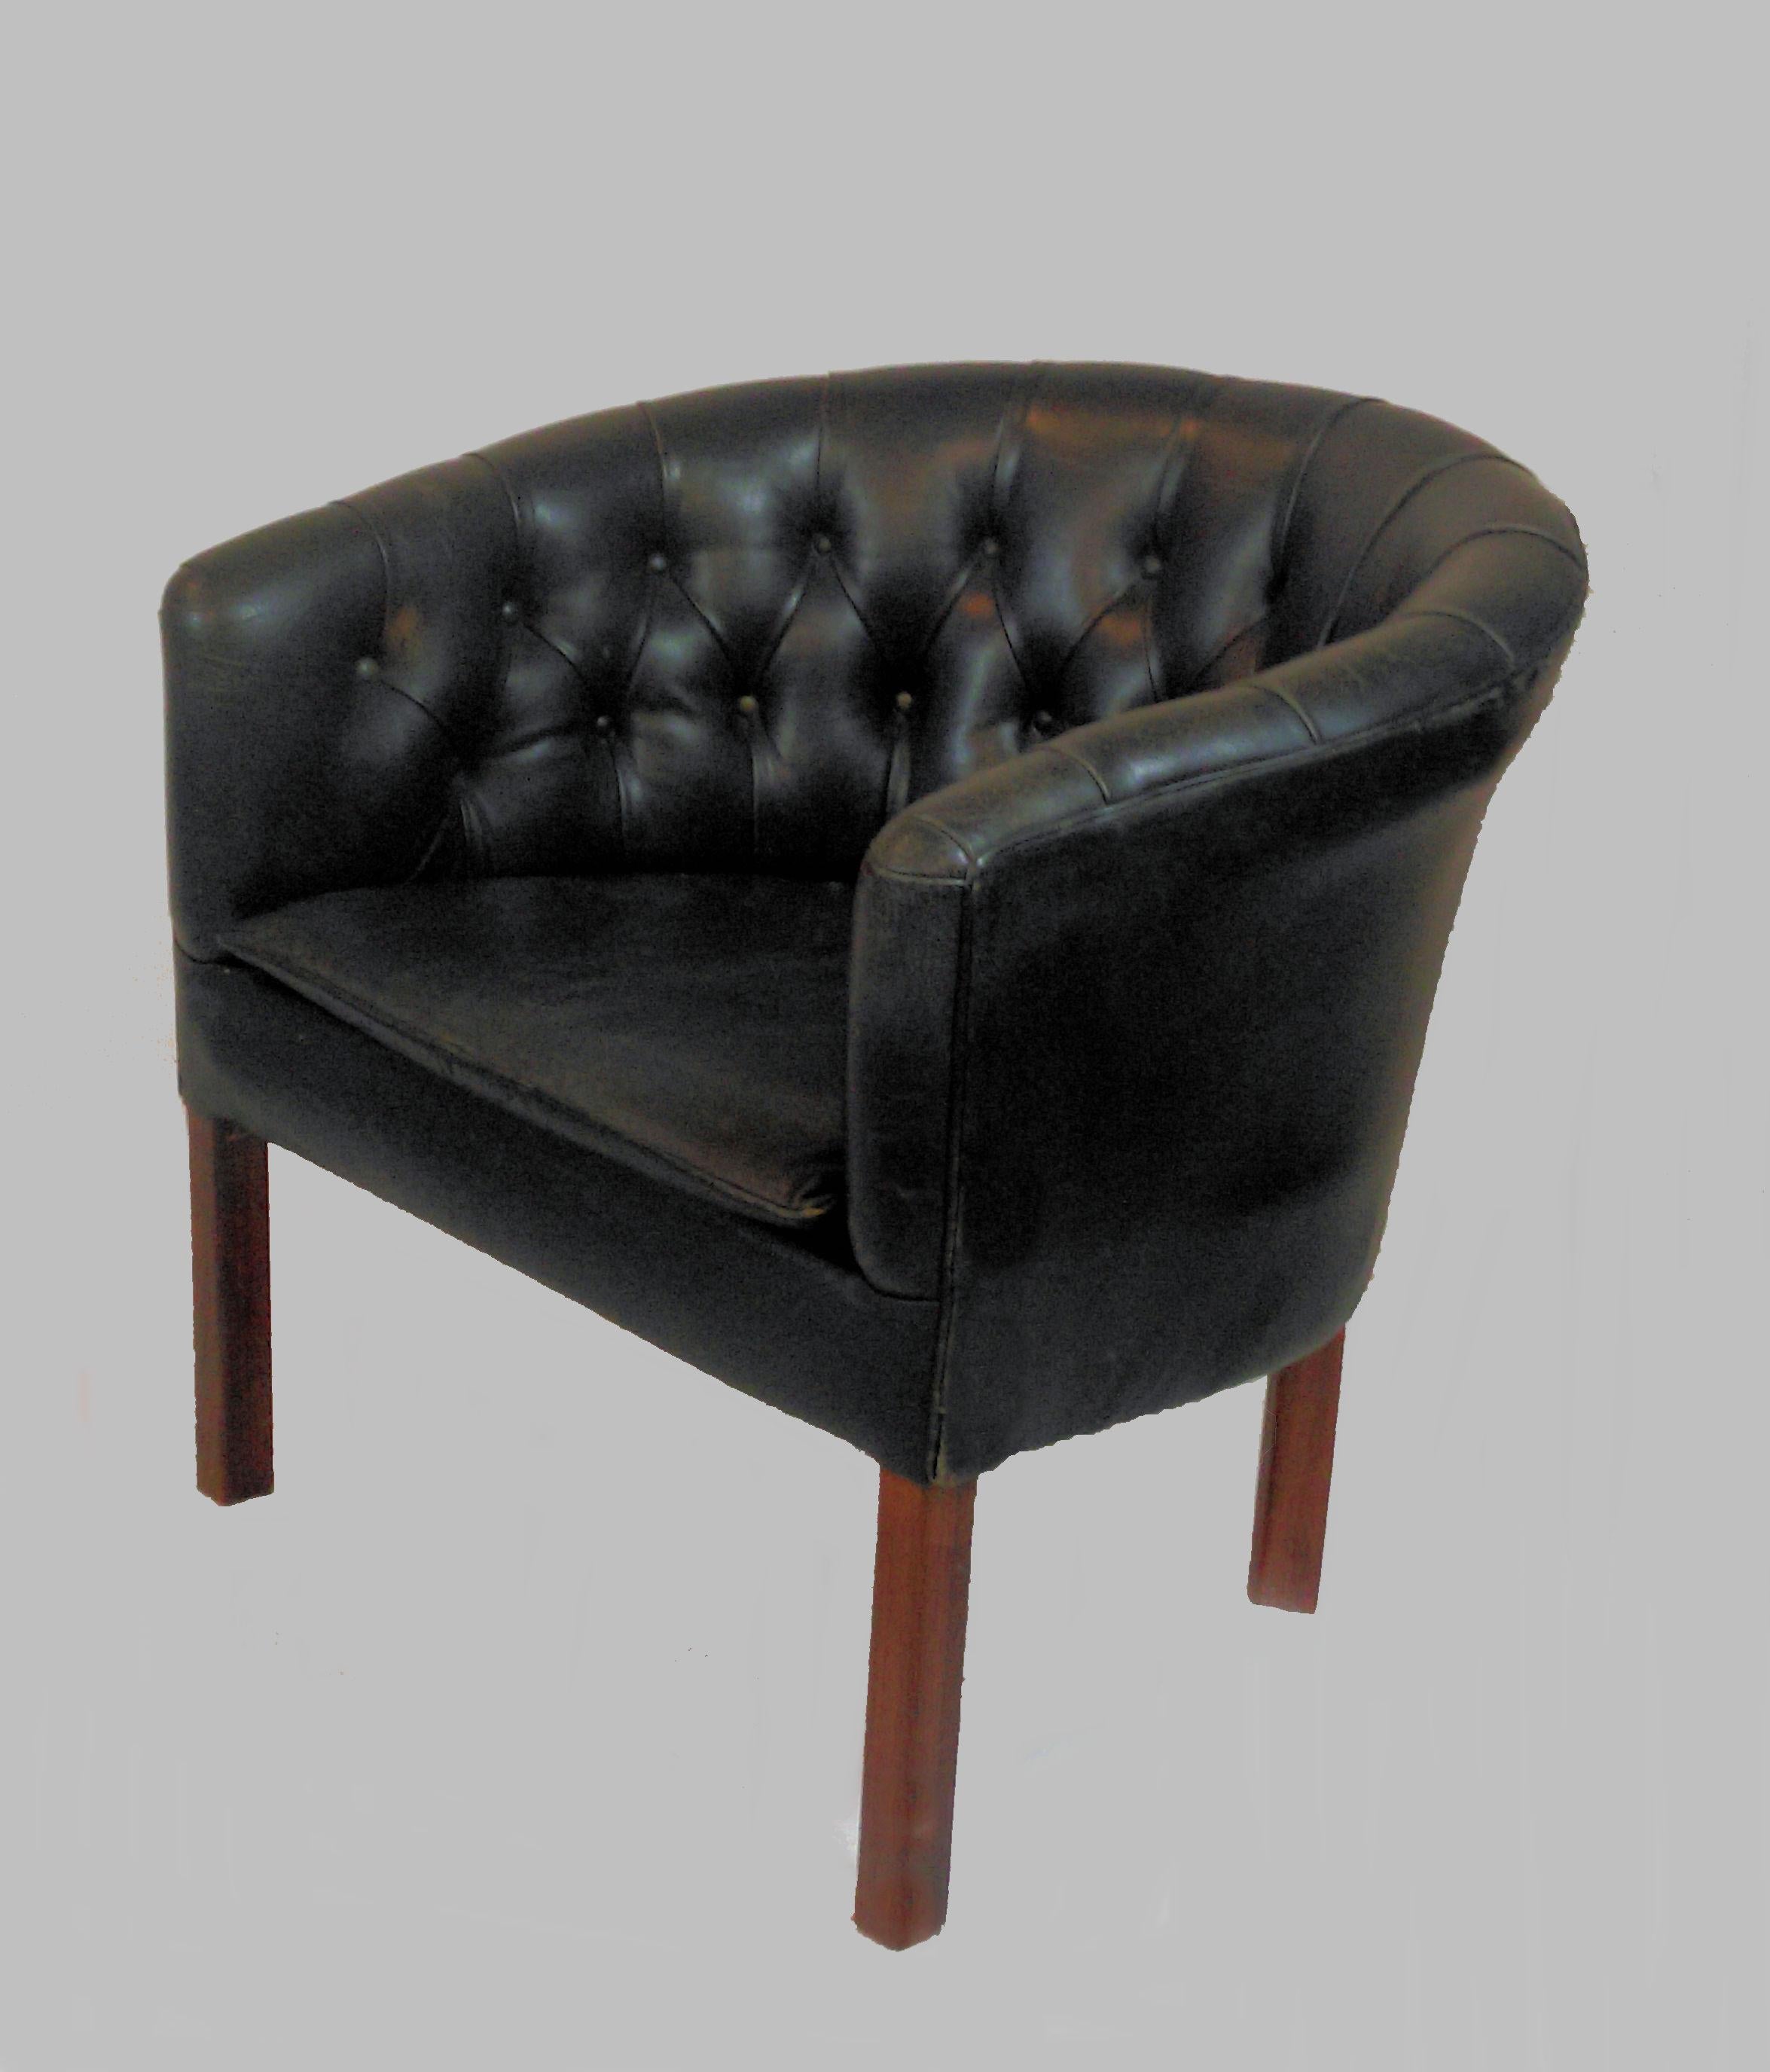 Art Deco 1930s Danish Lounge Chair and Sofa in Black Leather